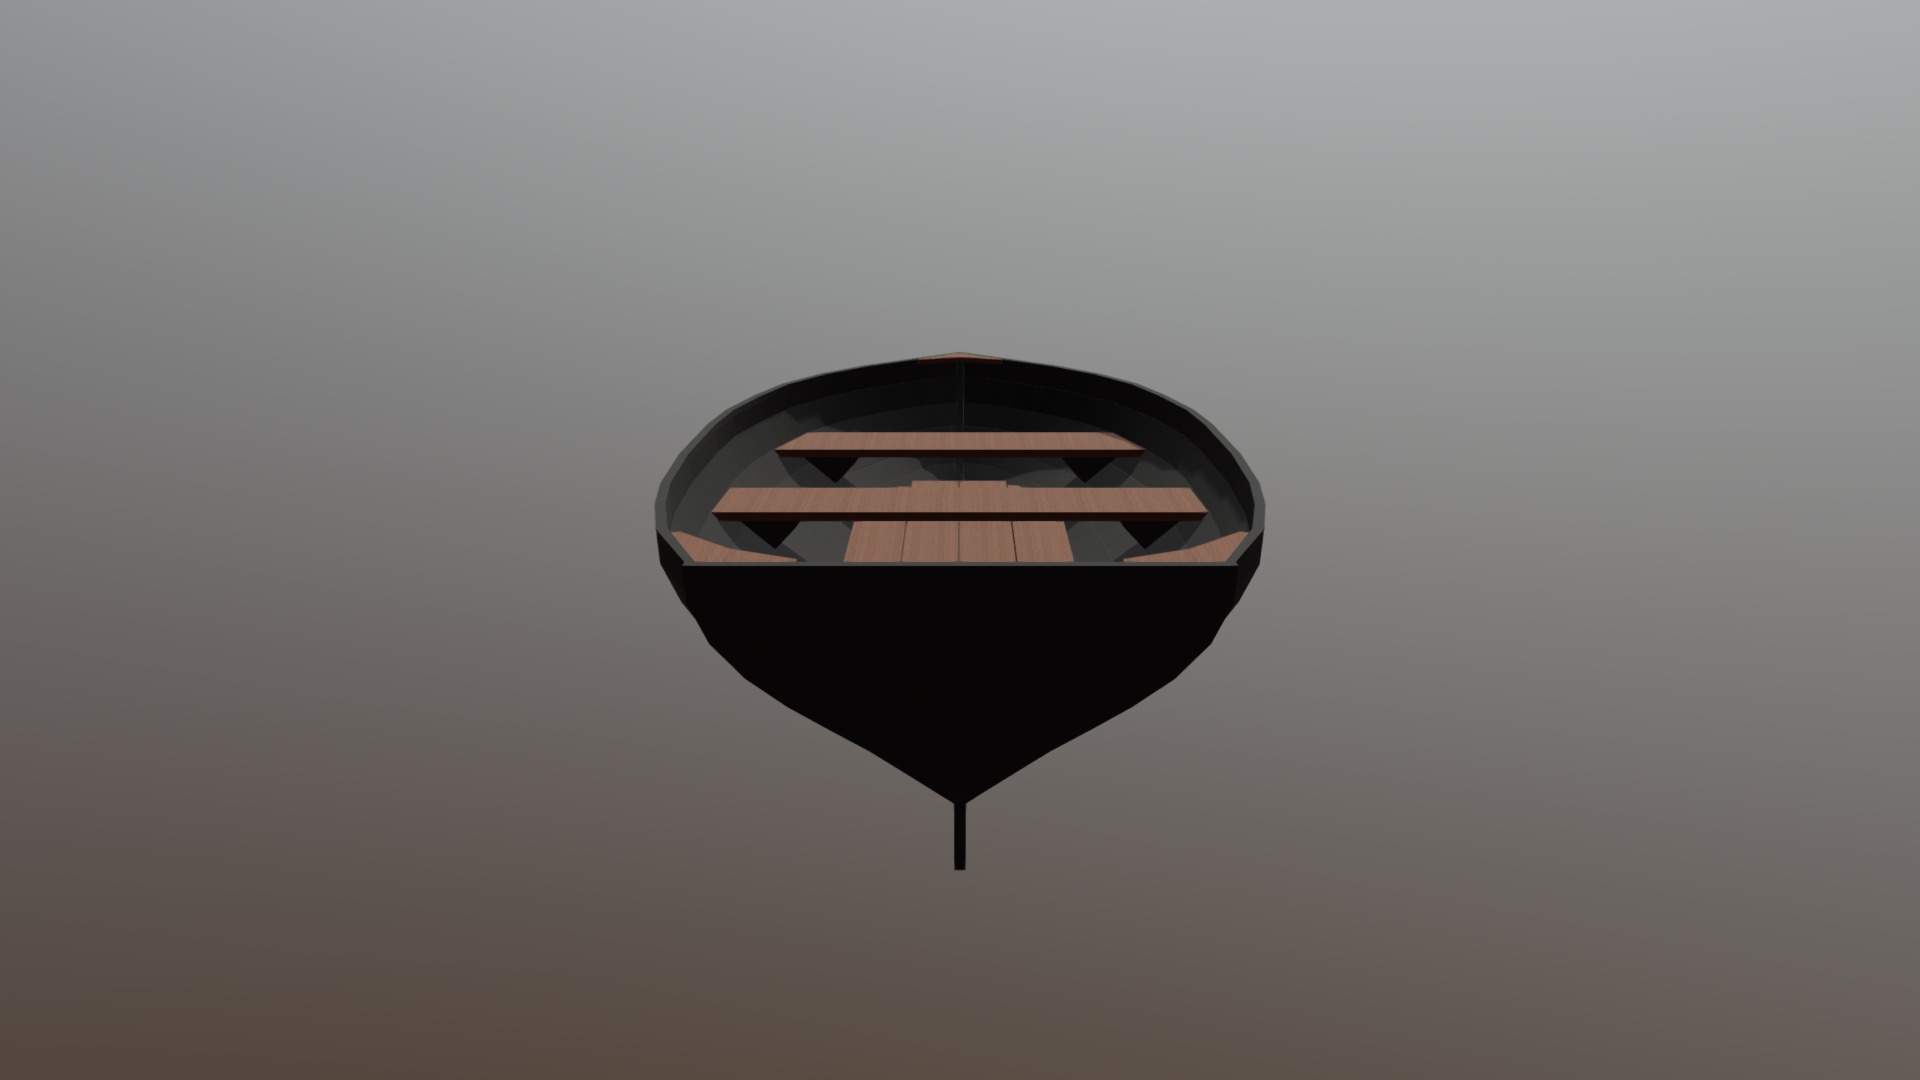 3D model Wooden Boat - This is a 3D model of the Wooden Boat. The 3D model is about a circular object with a black top.